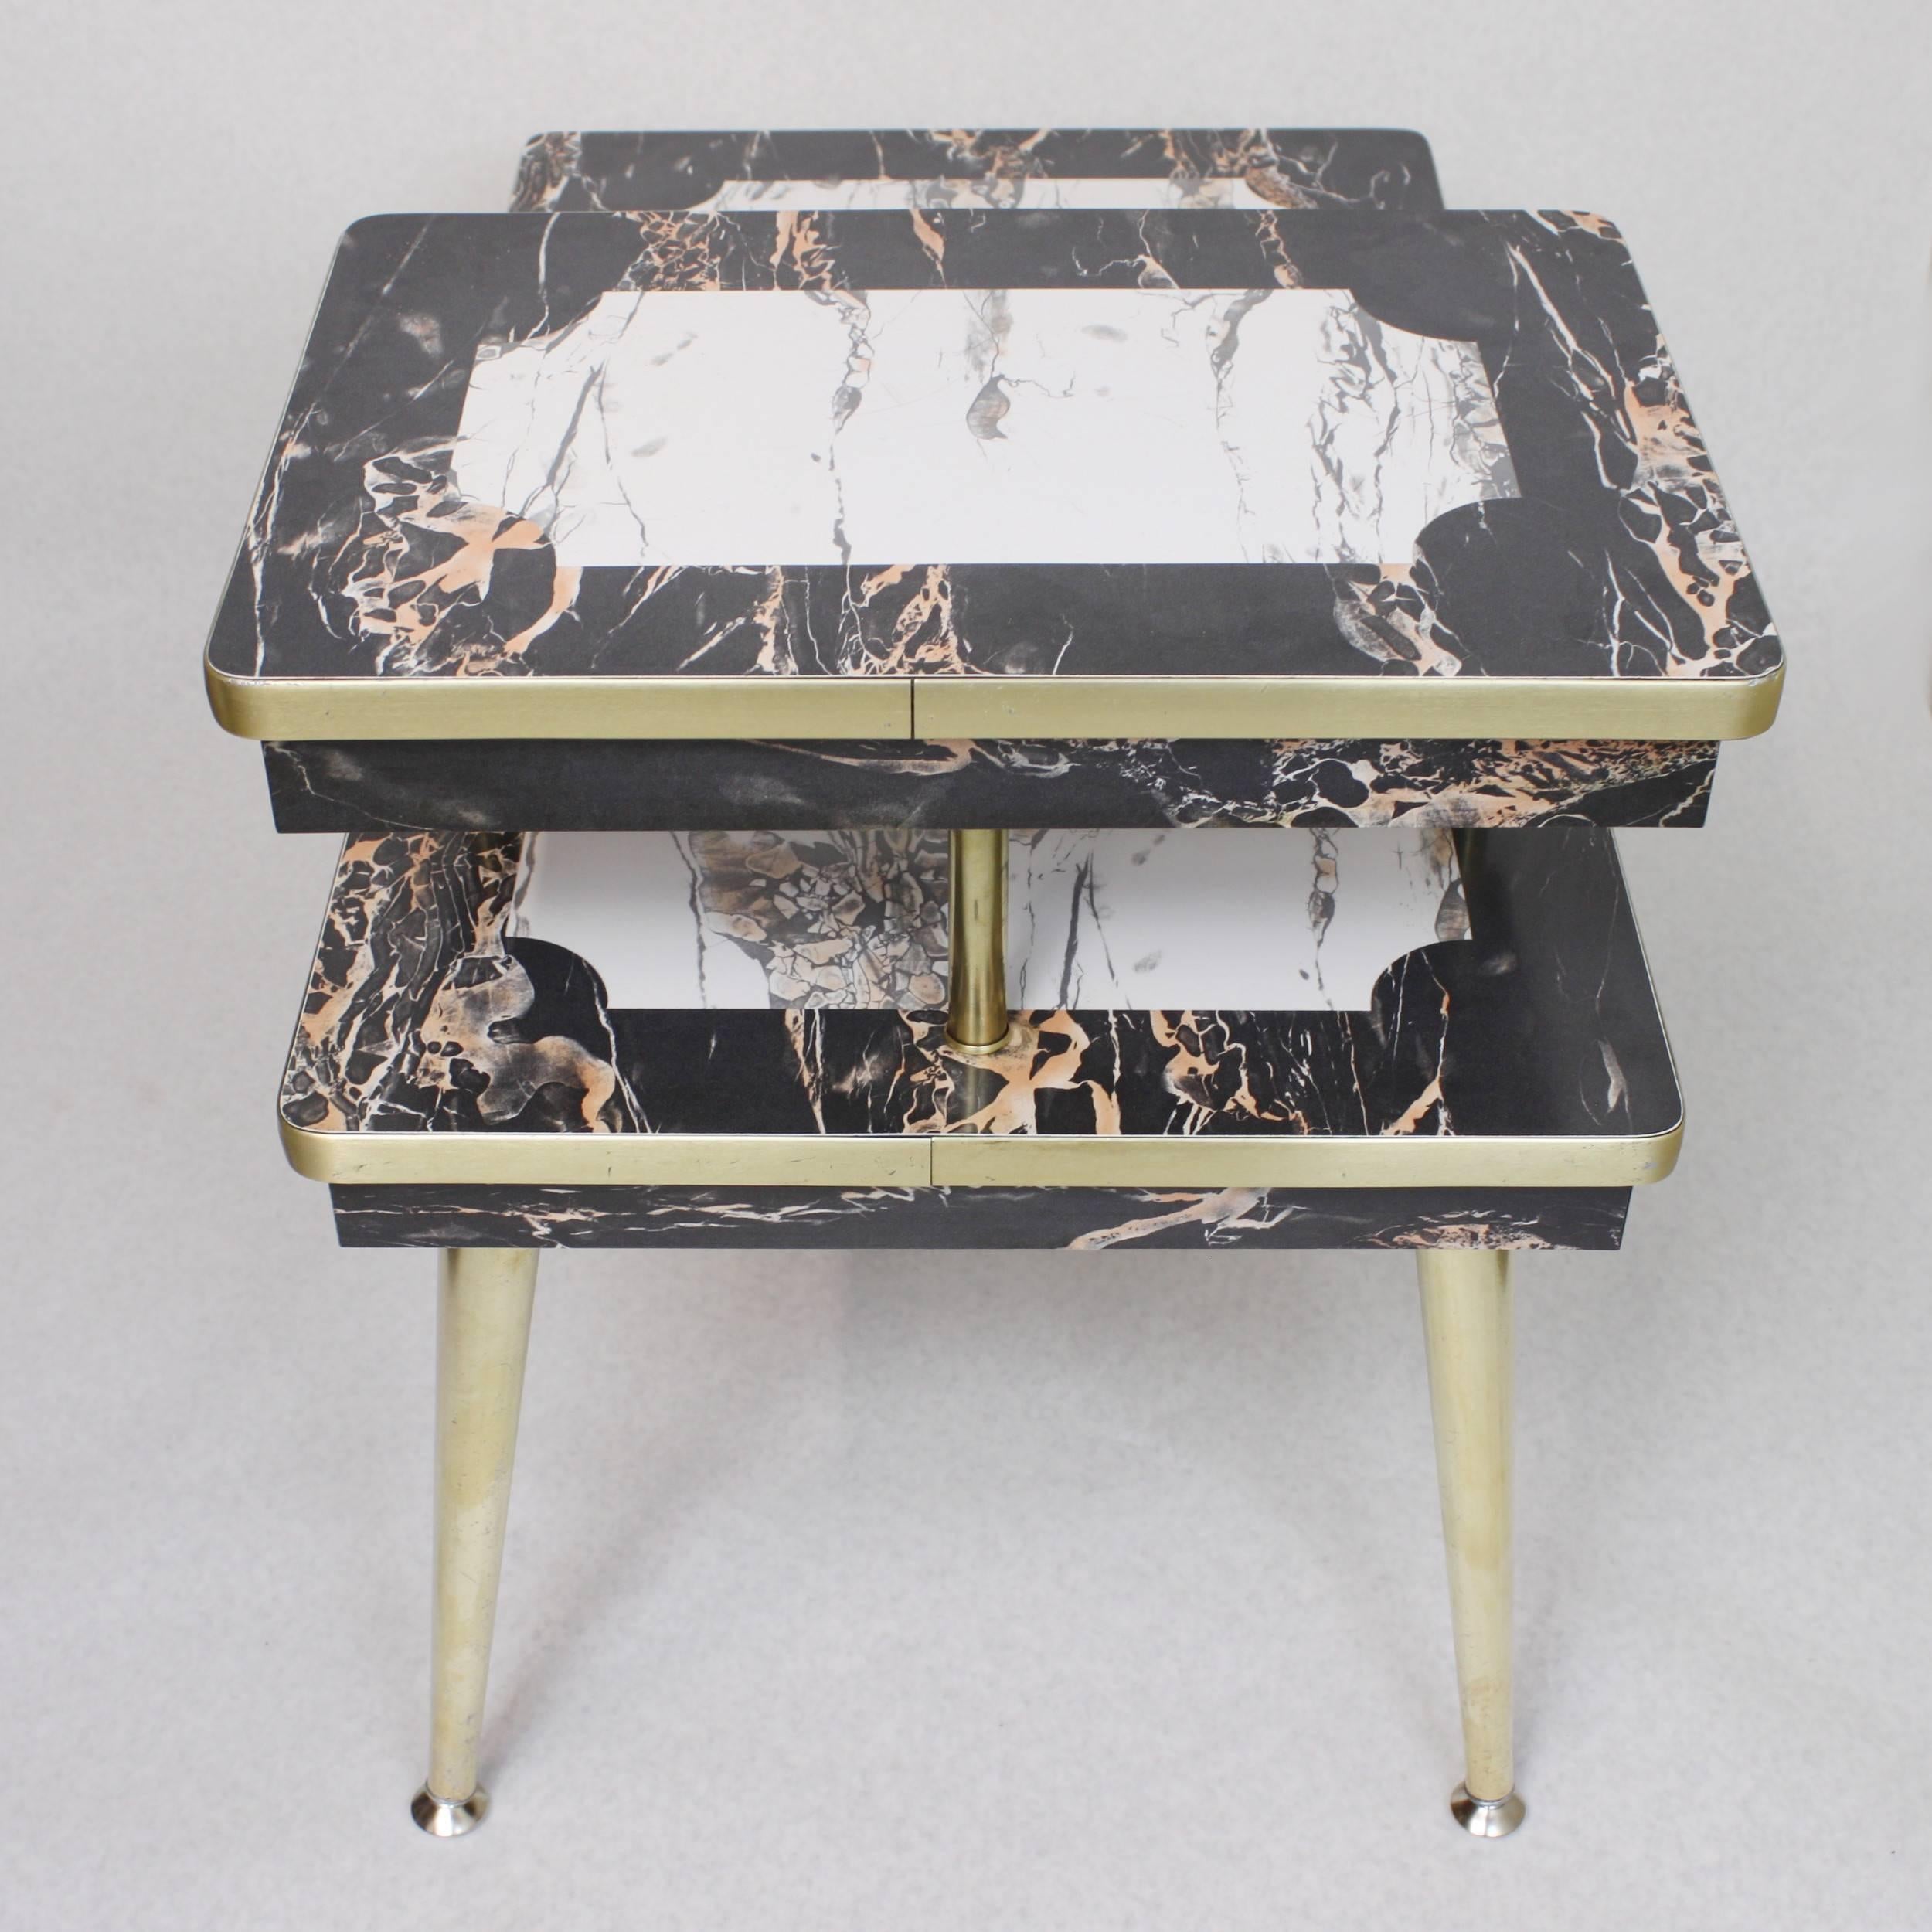 Pair of Matching Mid-Century Modern Black & White Faux-Marble & Brass End Tables 2